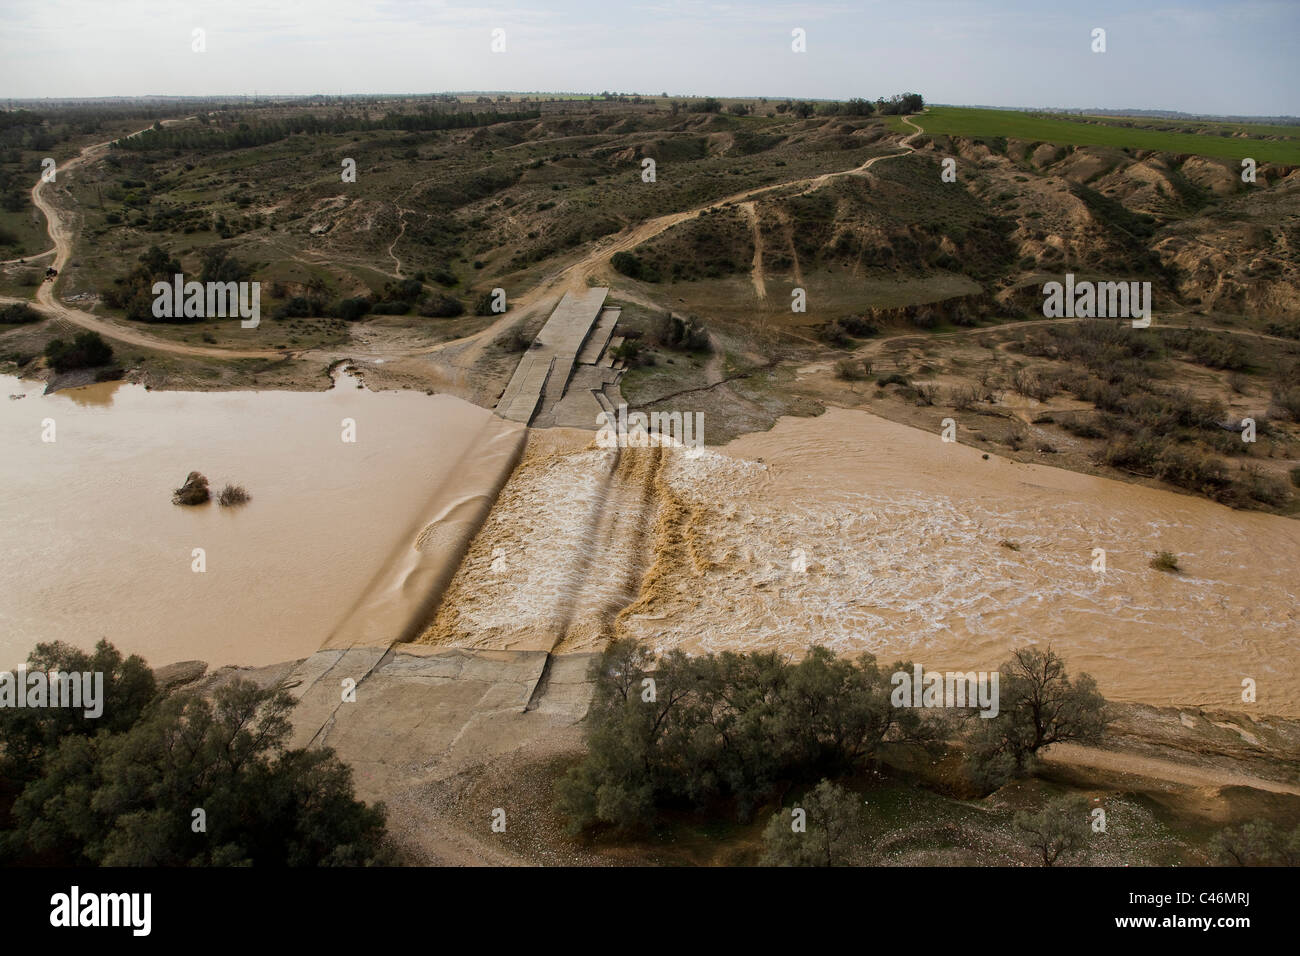 Aerial photograph of the Bsor stream after a flood in the Negev desert at winter Stock Photo